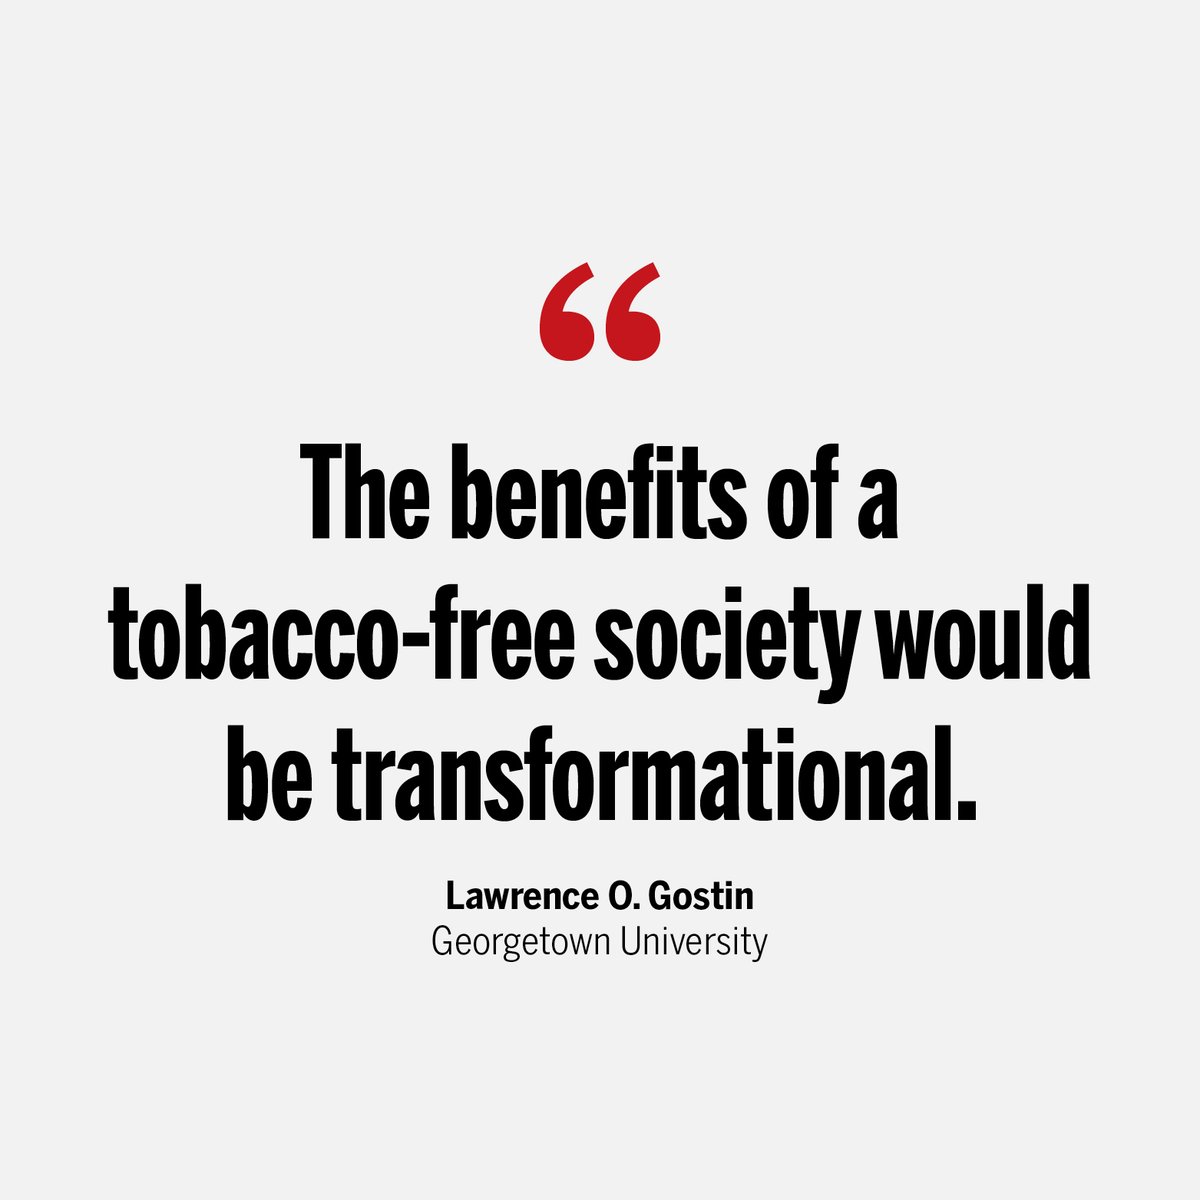 'The truth is that there is no safe age to start smoking. Preventing tobacco dependency, beginning with young people, would garner huge public support,' @LawrenceGostin writes in a new #ScienceEditorial. scim.ag/747